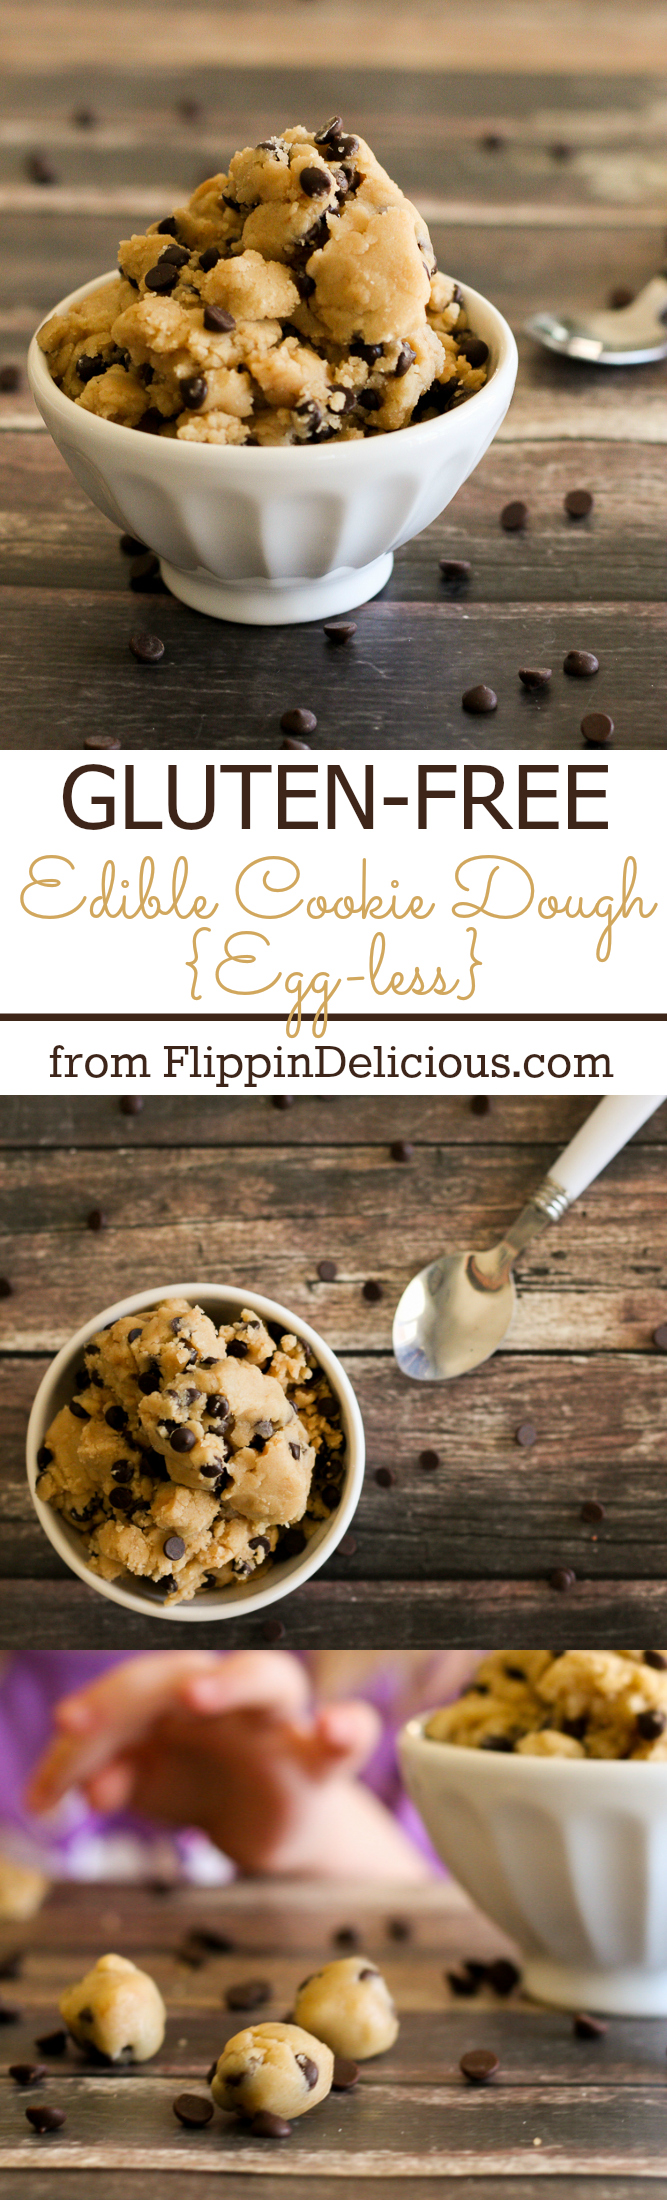 white bowl of gluten free edible cookie dough with chocolate chips on farmhouse table sprinkled with mini chocolate chips with text saying gluten-free edible cookie dough [eggless] from flippindelicious.com